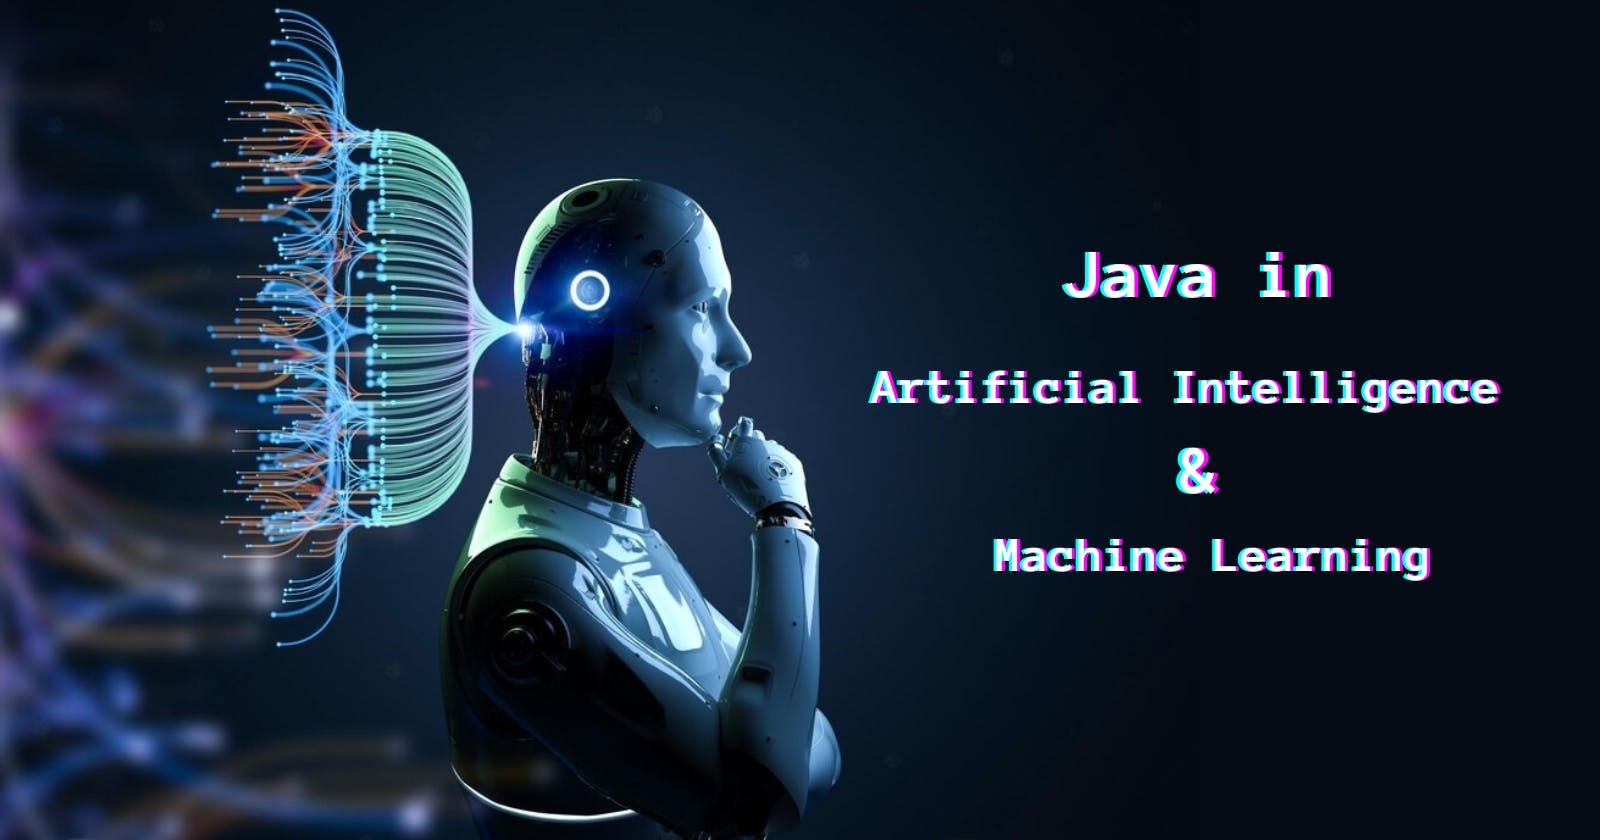 Java in Artificial Intelligence and Machine Learning